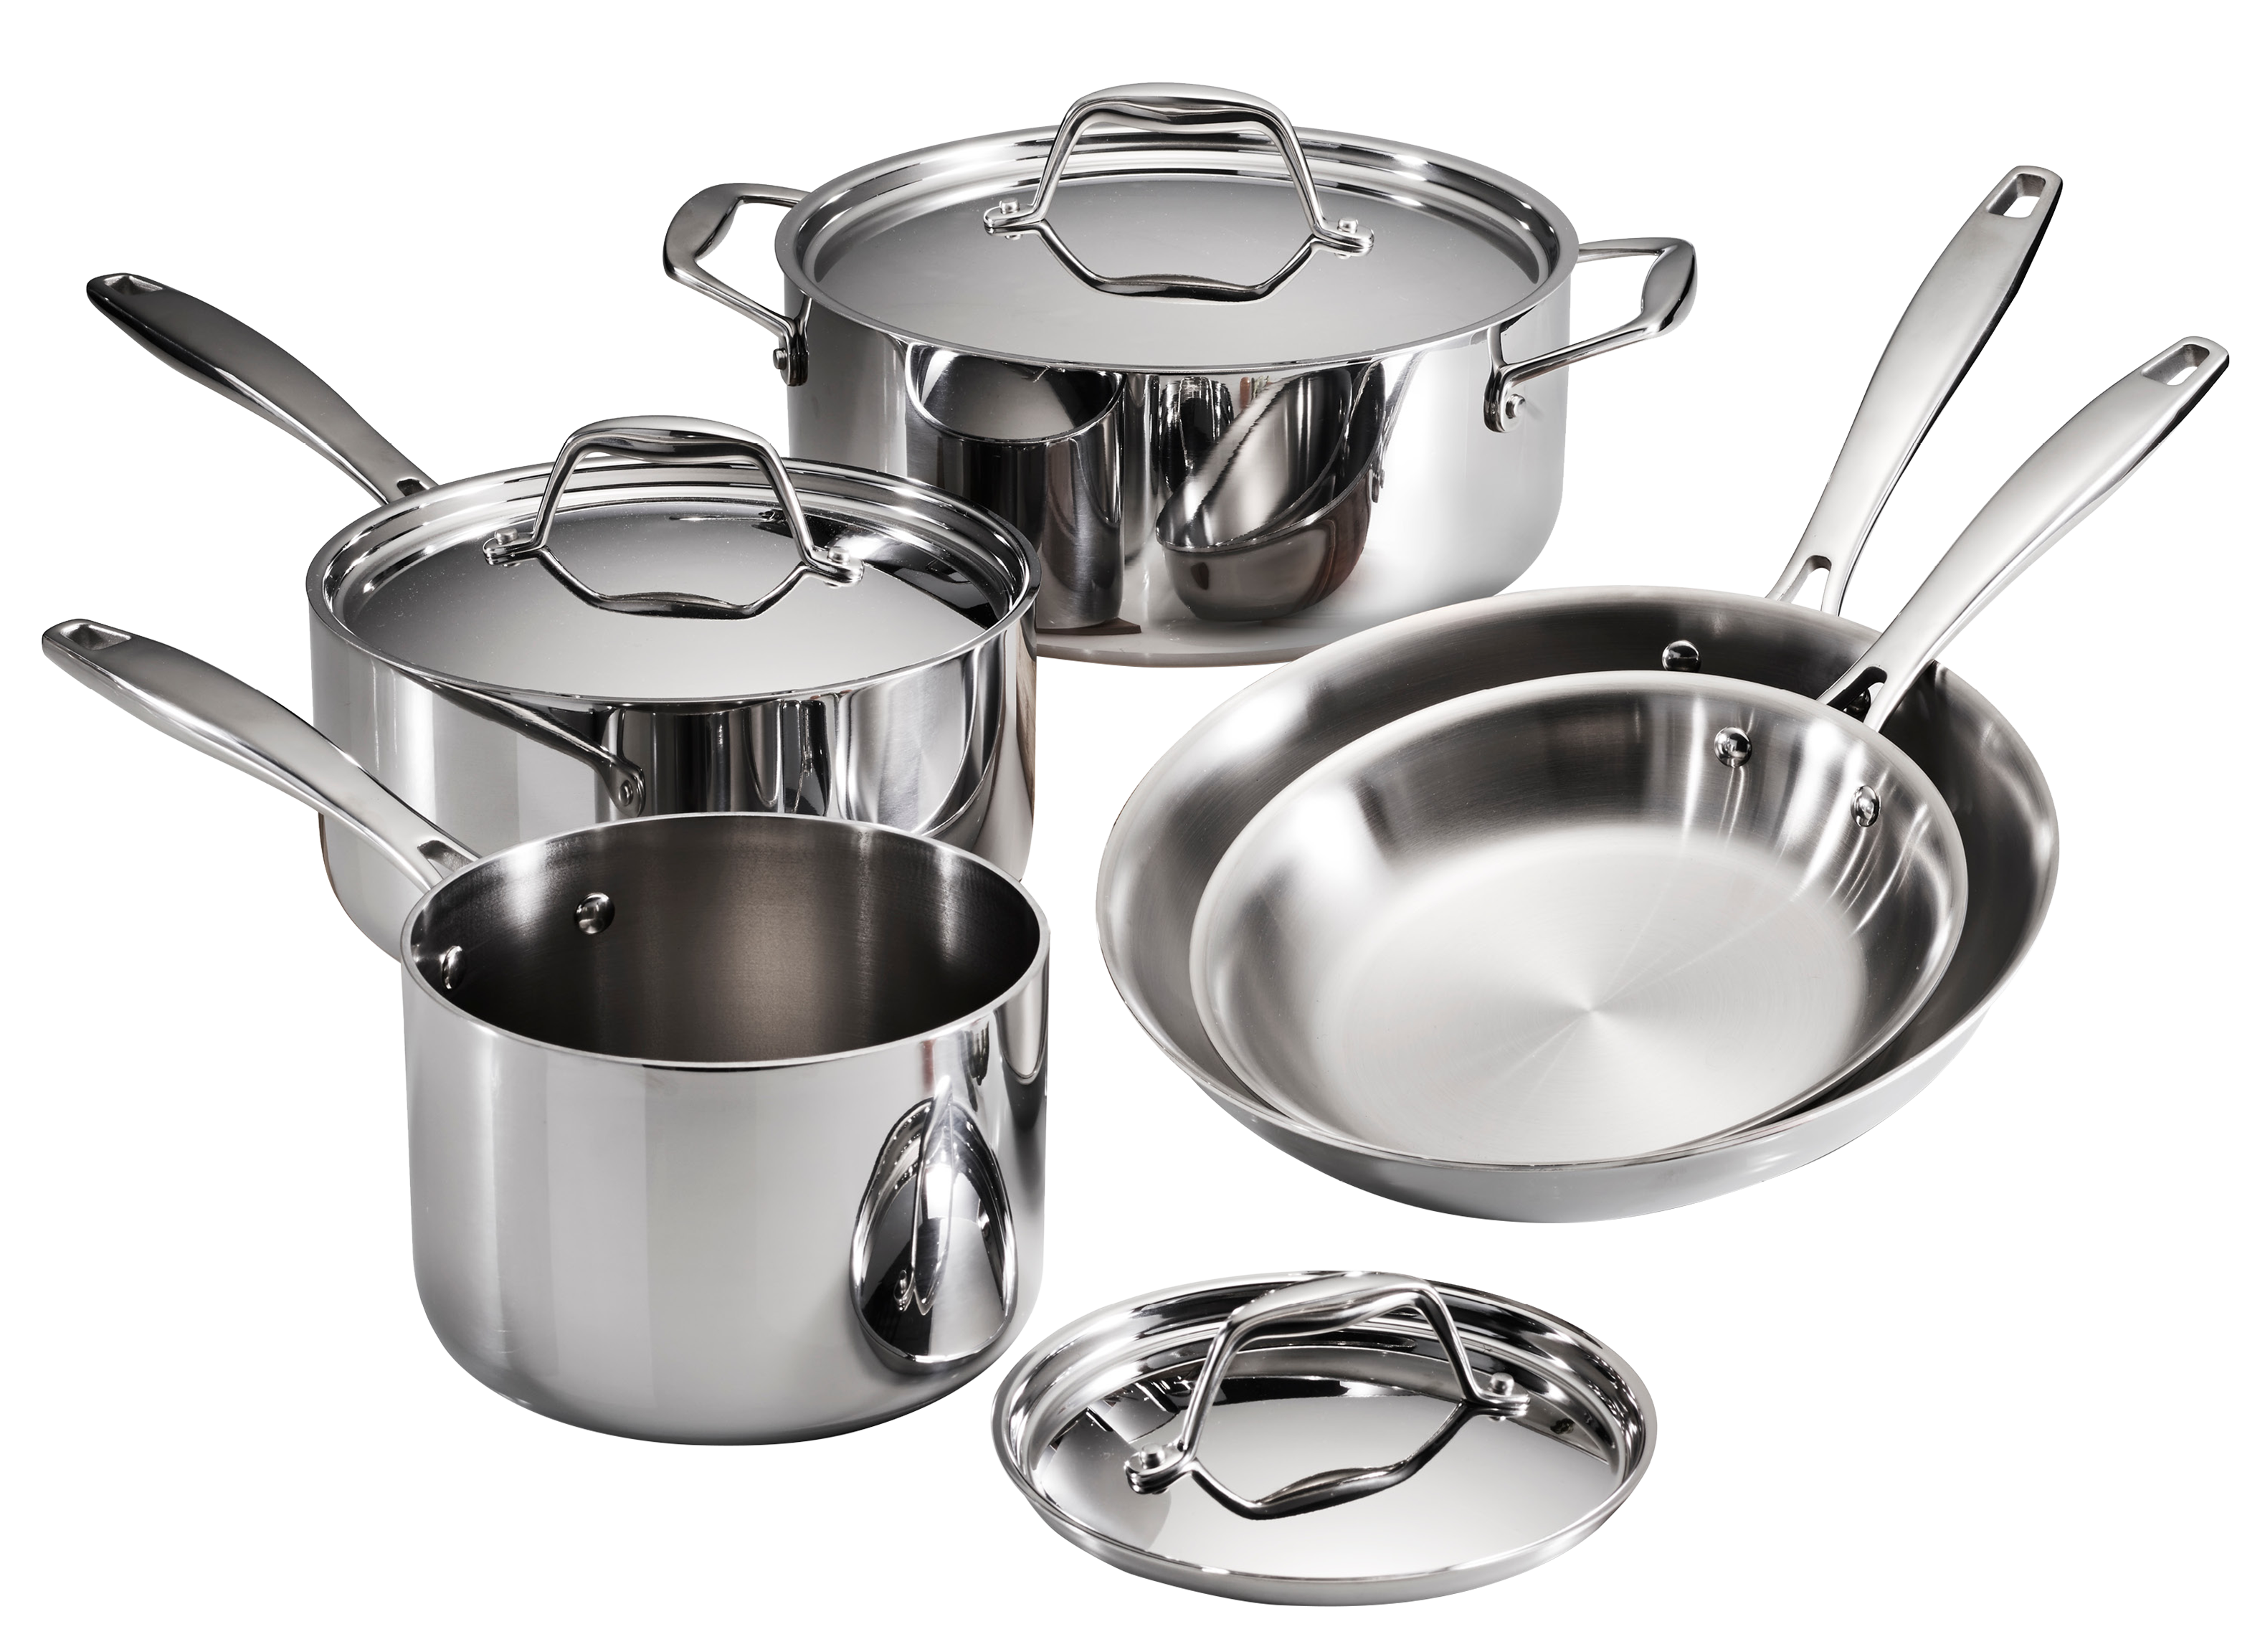 https://crdms.images.consumerreports.org/prod/products/cr/models/404506-cookware-sets-stainless-steel-tramontina-tri-ply-clad-item-80116-247ds-10022548.png